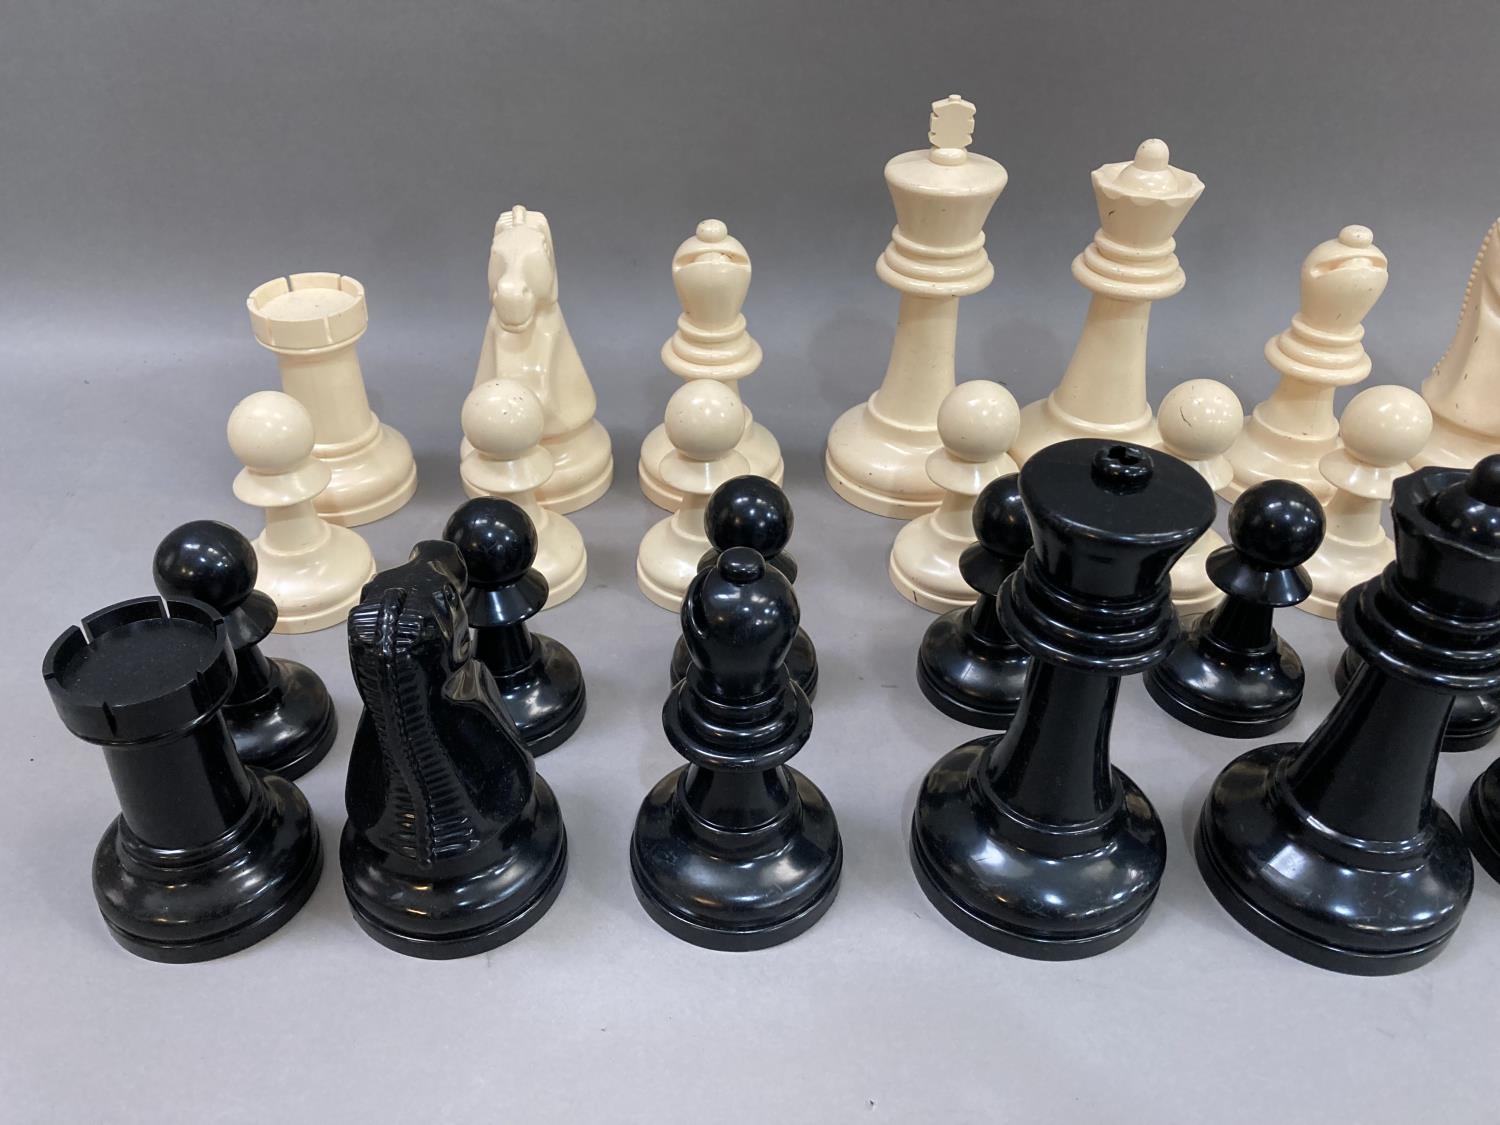 A outdoors chess set in cream and black plastic, the king measuring 21cm high - Image 3 of 3